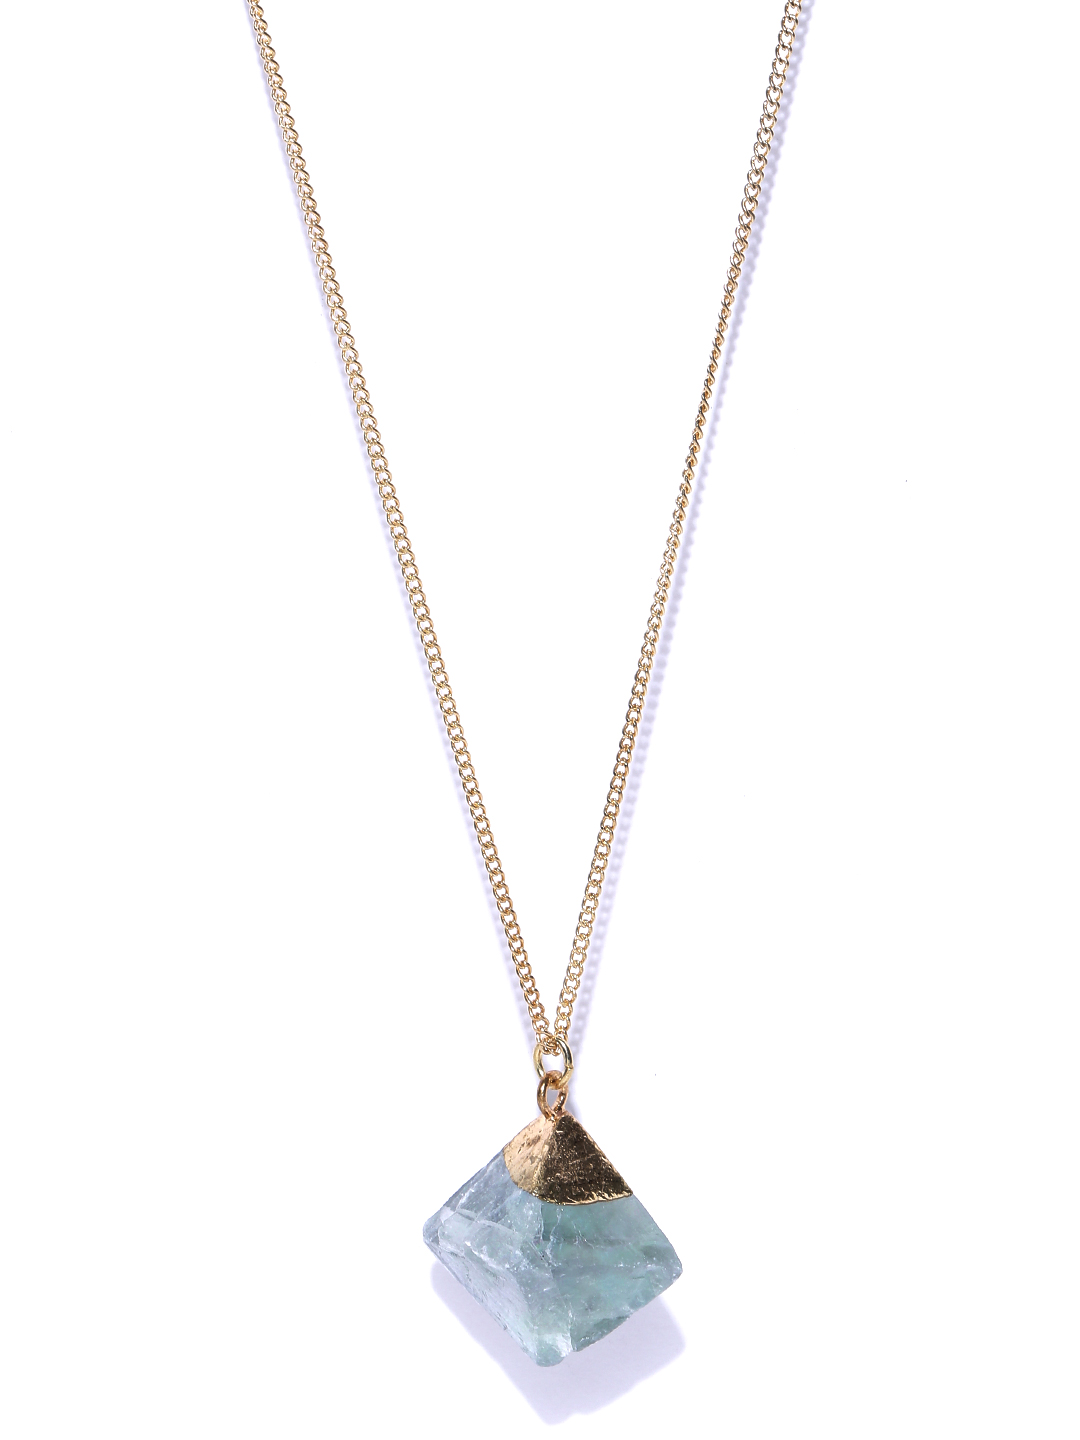 Accessorize Gold-Toned Stone-Studded Matinee Necklace